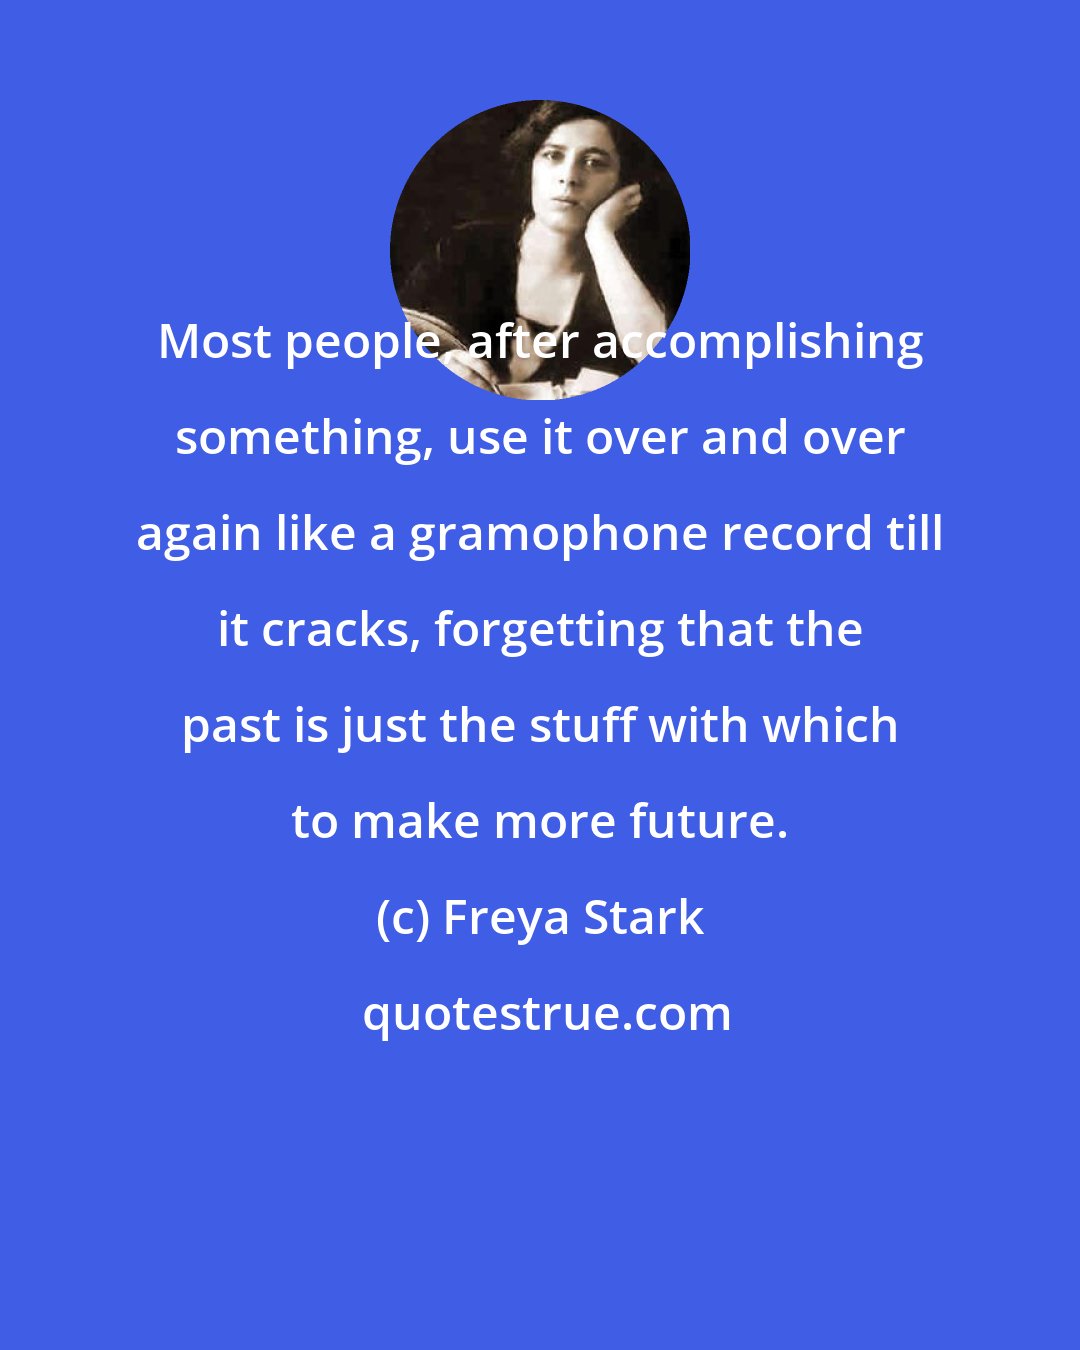 Freya Stark: Most people, after accomplishing something, use it over and over again like a gramophone record till it cracks, forgetting that the past is just the stuff with which to make more future.